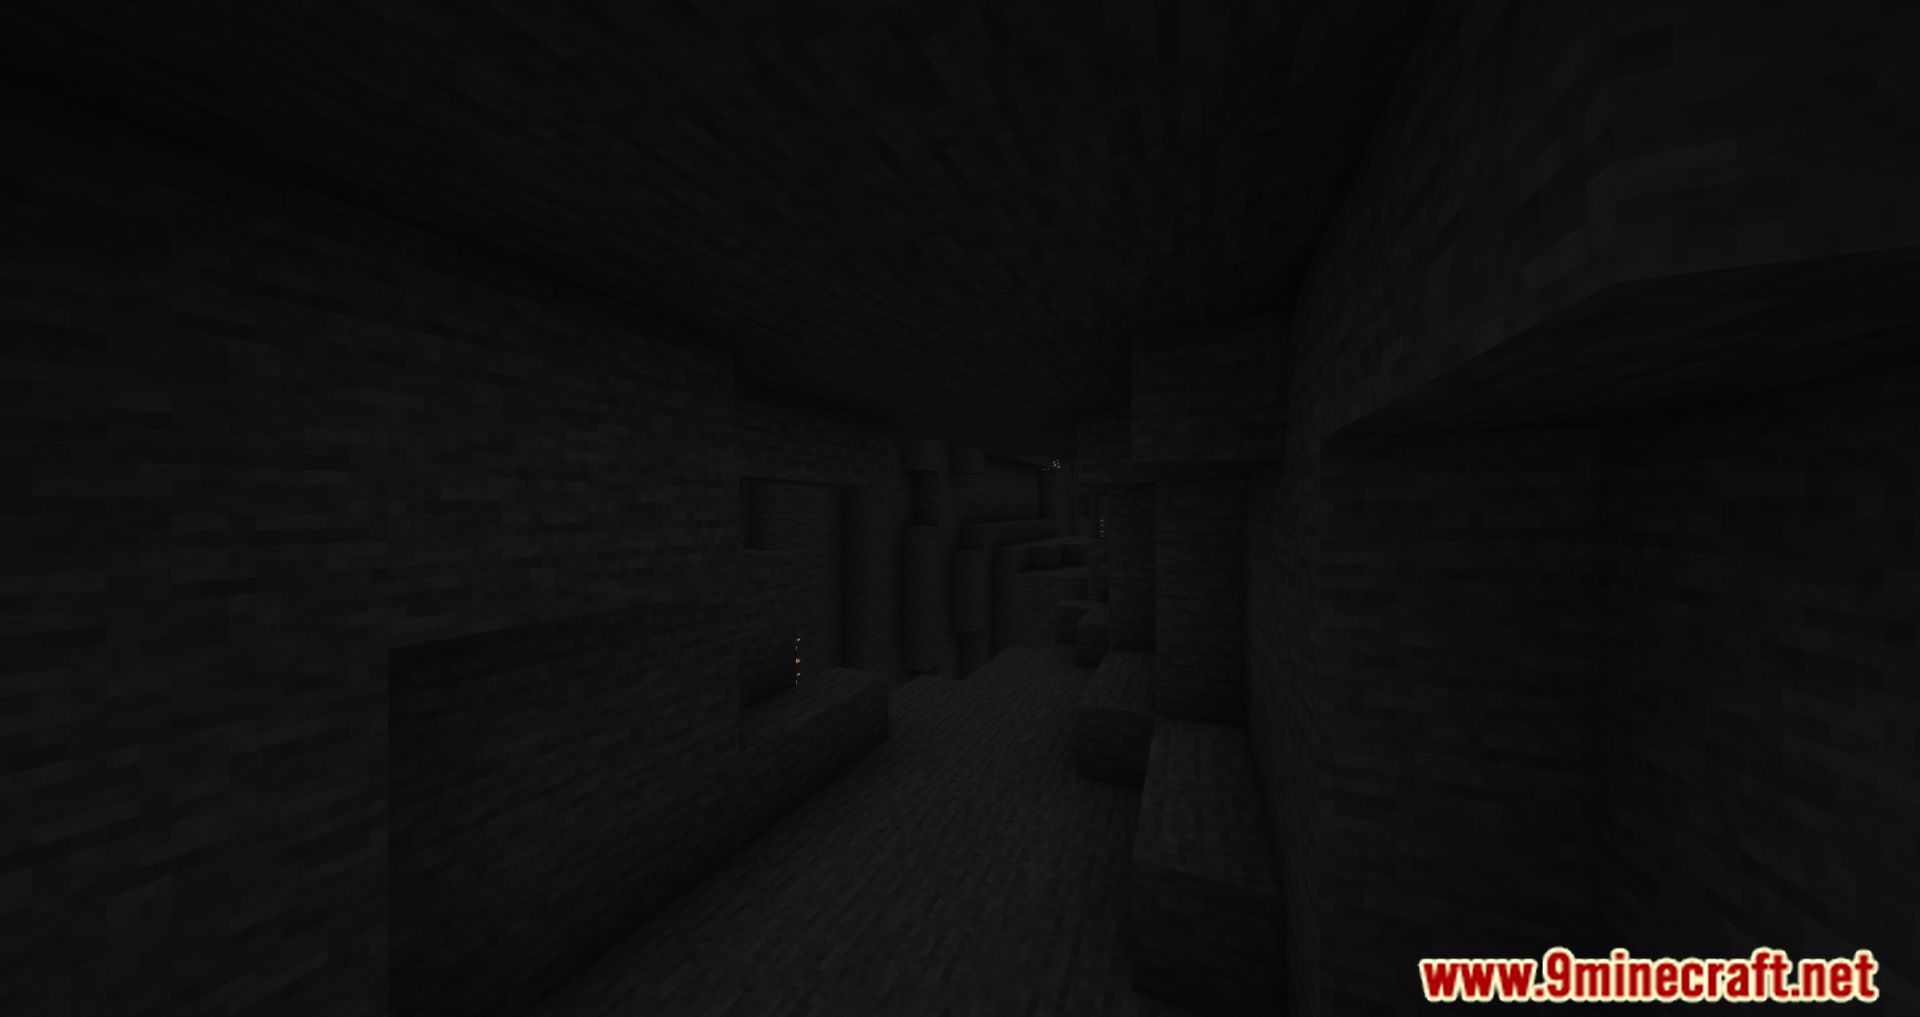 Cave Generator Mod (1.16.5, 1.12.2) - Fully Customize Mojang's Tunnels 7